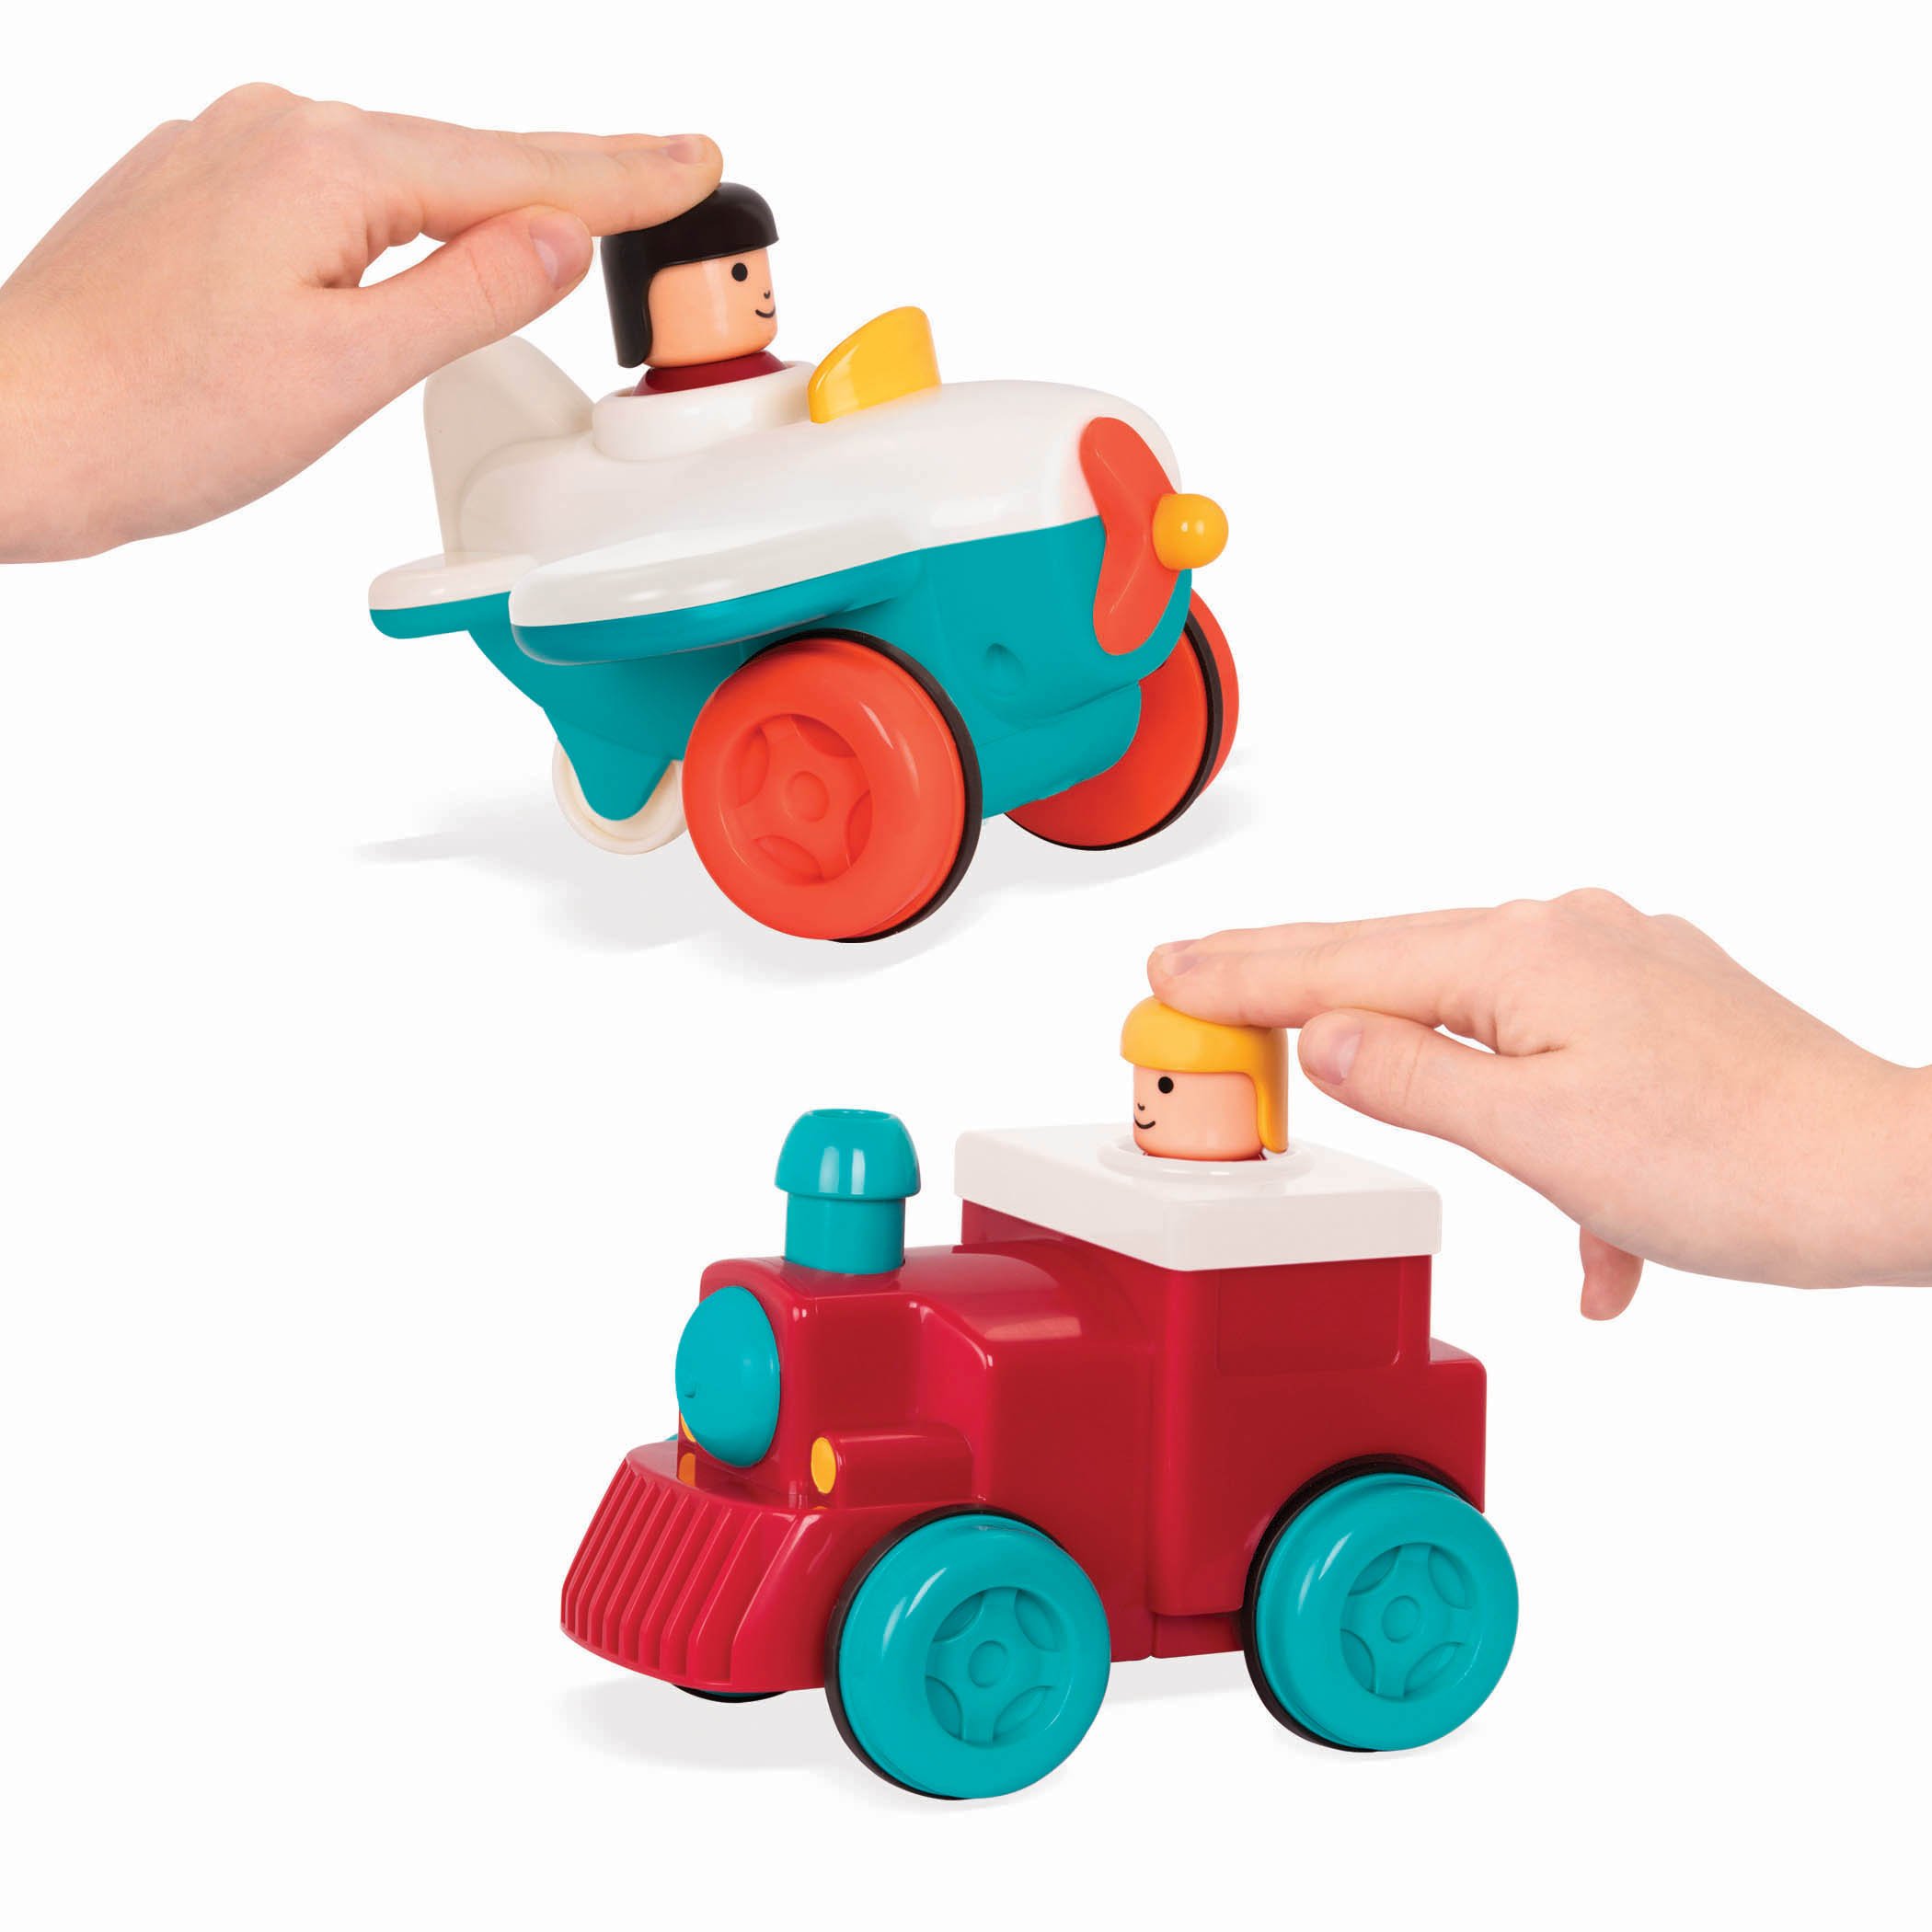 Battat – Push and Go Vehicles – Friction Powered Pull-back Cars for Kids 18 Months + (Plane + Train Combo)